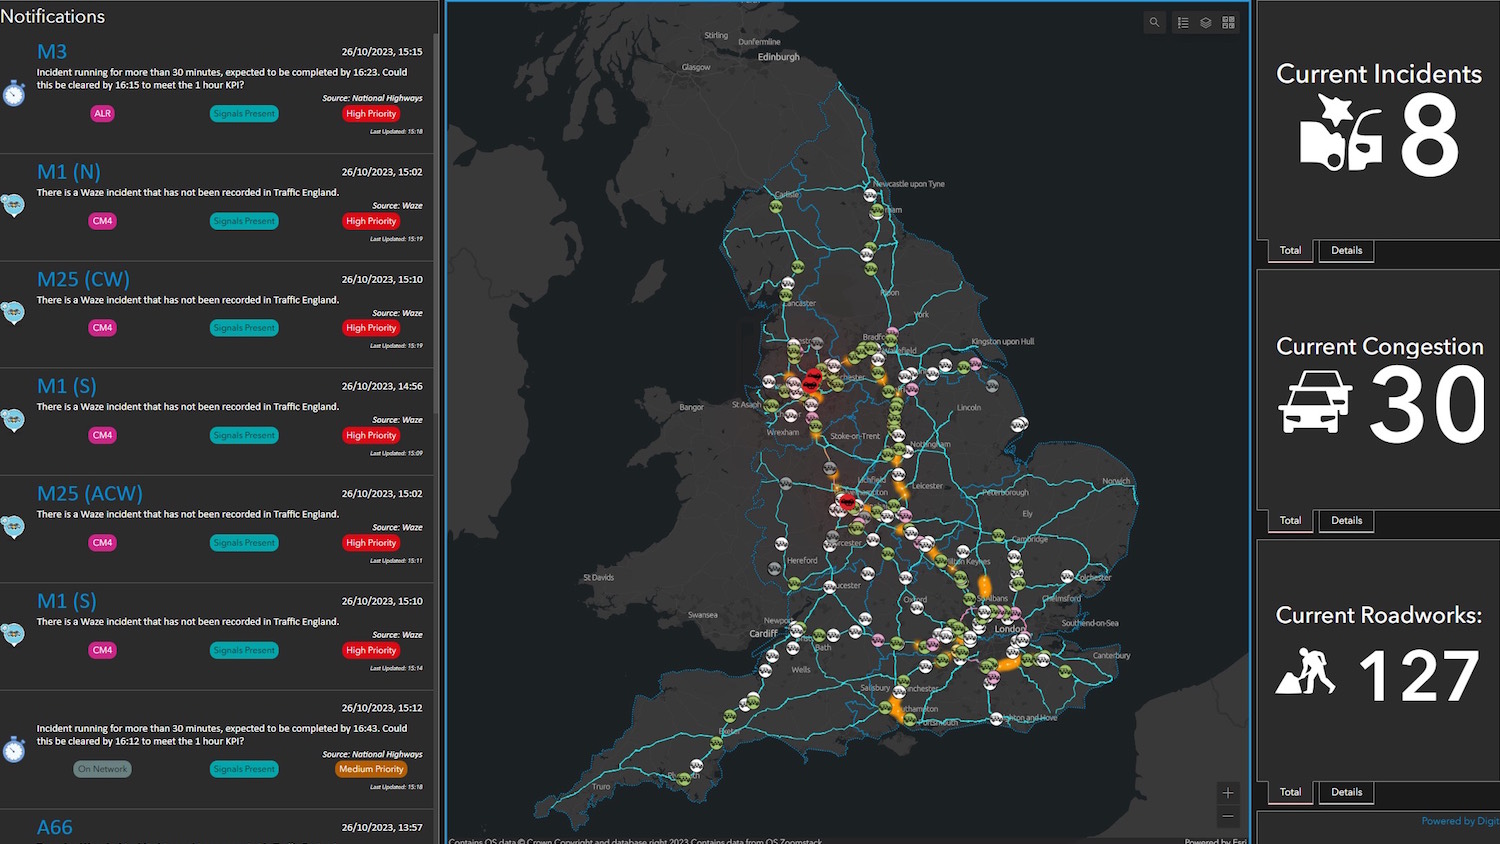 A screen grab of the National Highways GIS portal